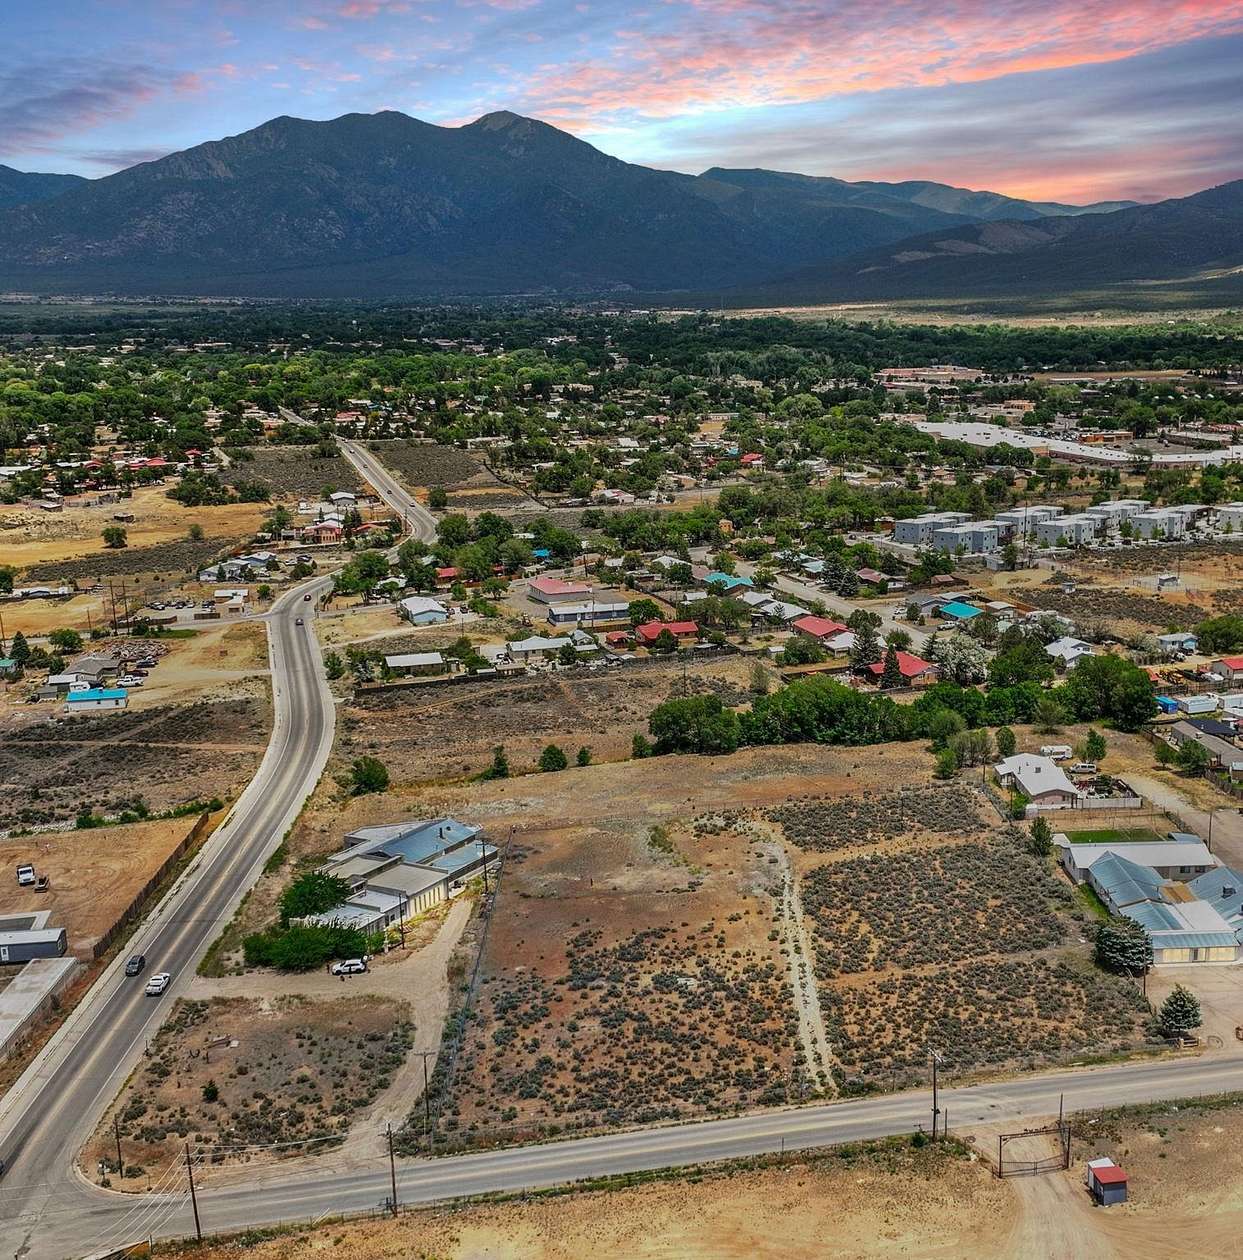 2.72 Acres of Mixed-Use Land for Sale in Taos, New Mexico